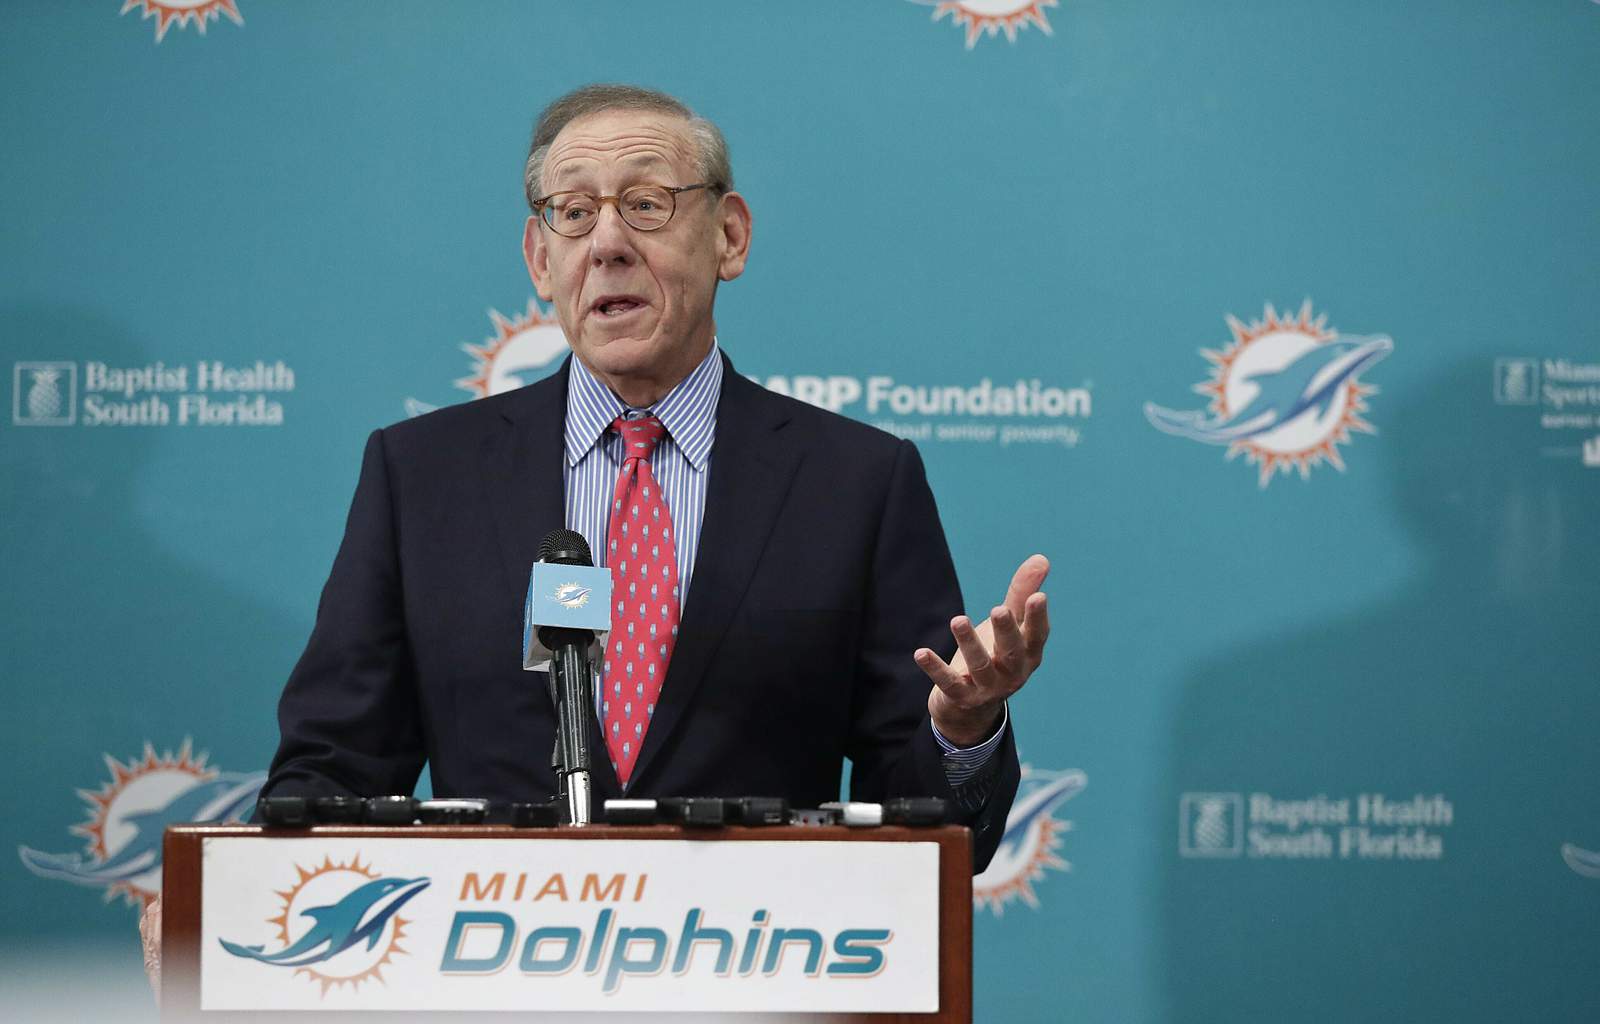 Dolphins owner: There definitely will be an NFL season